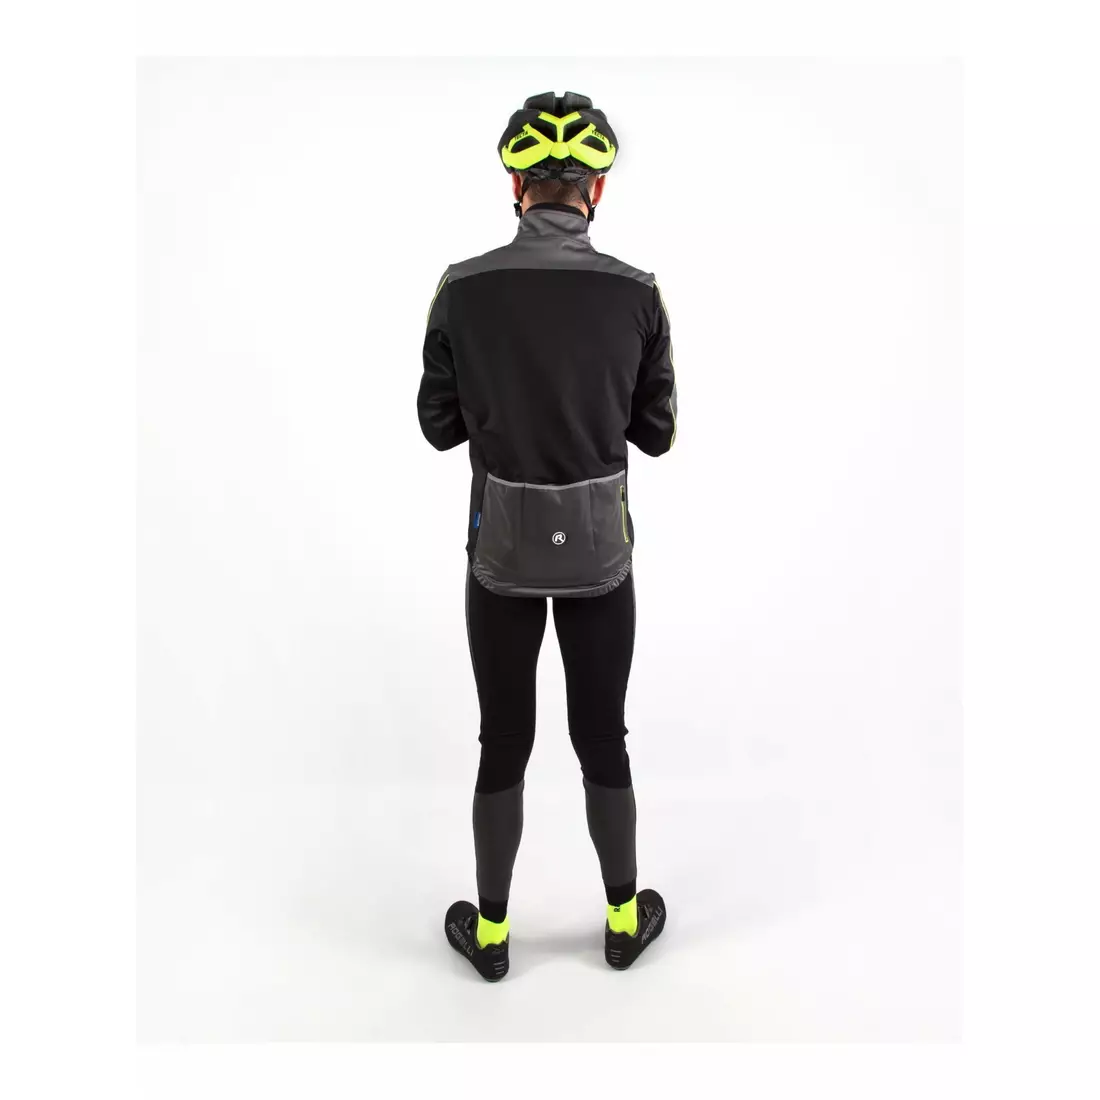 ROGELLI SPARK lightly padded cycling jacket Fluorine Gray Yellow 003.051